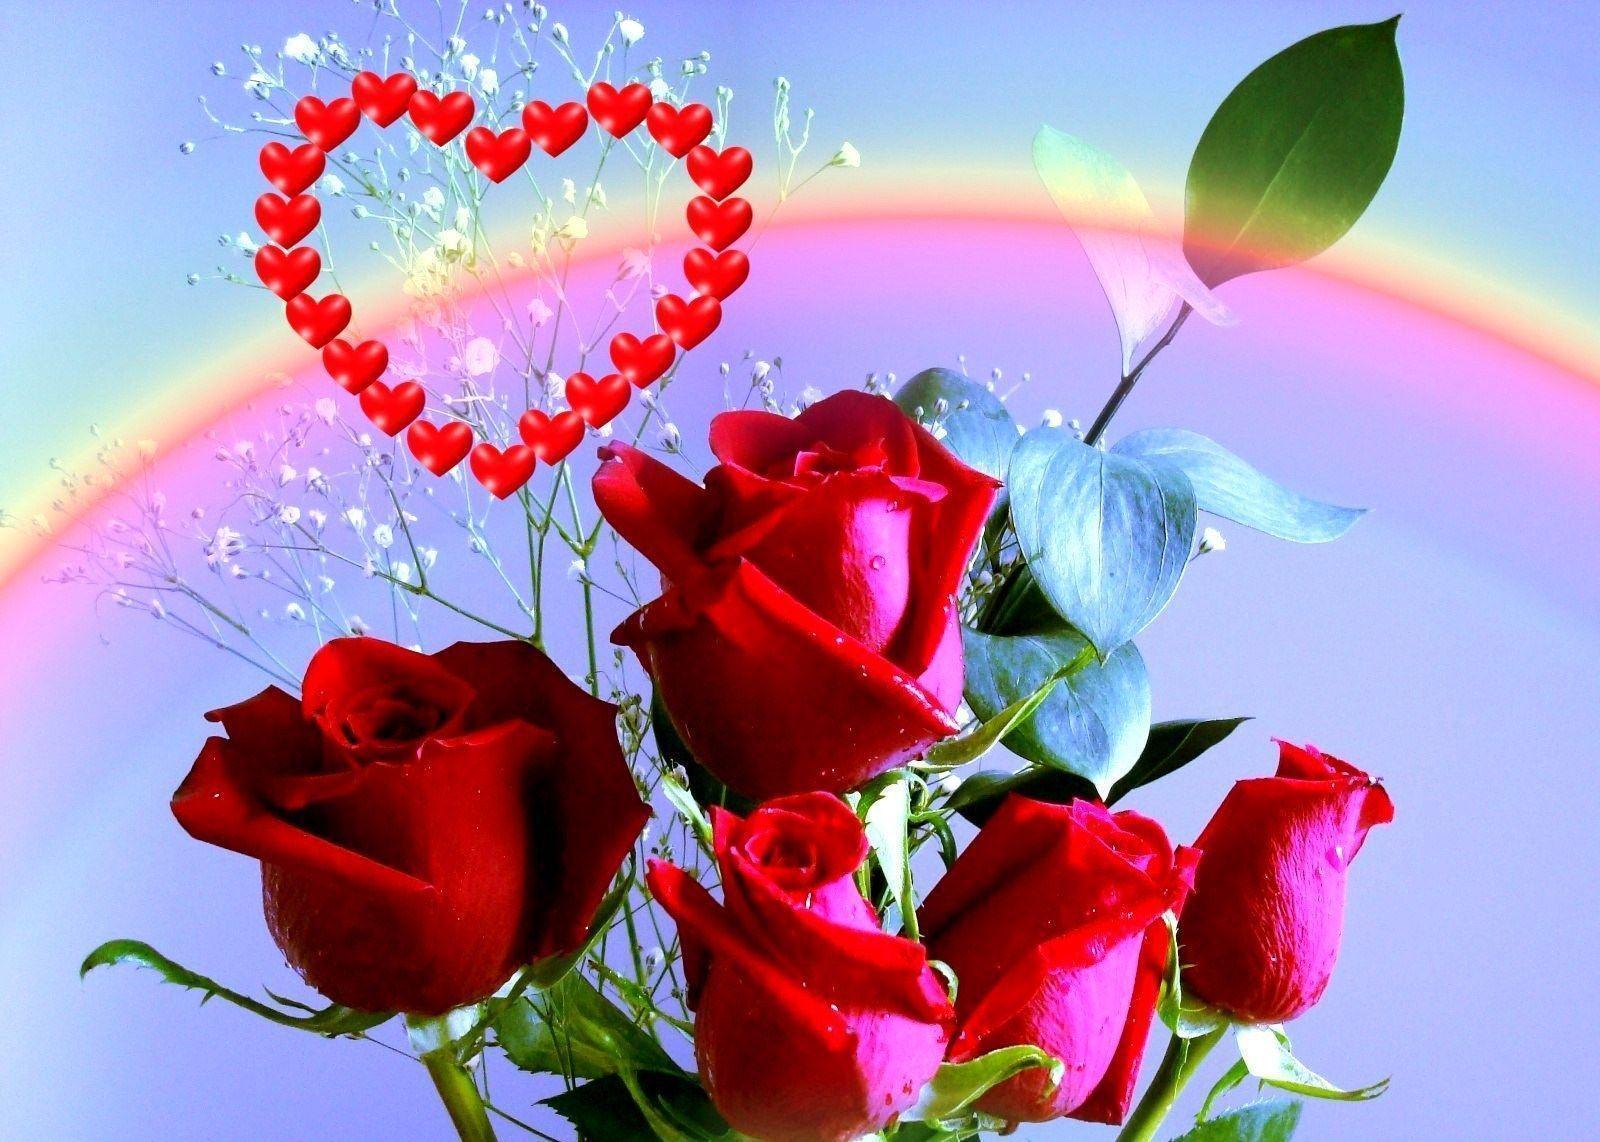 Wallpapers For > Wallpapers Of Red Roses With Heart